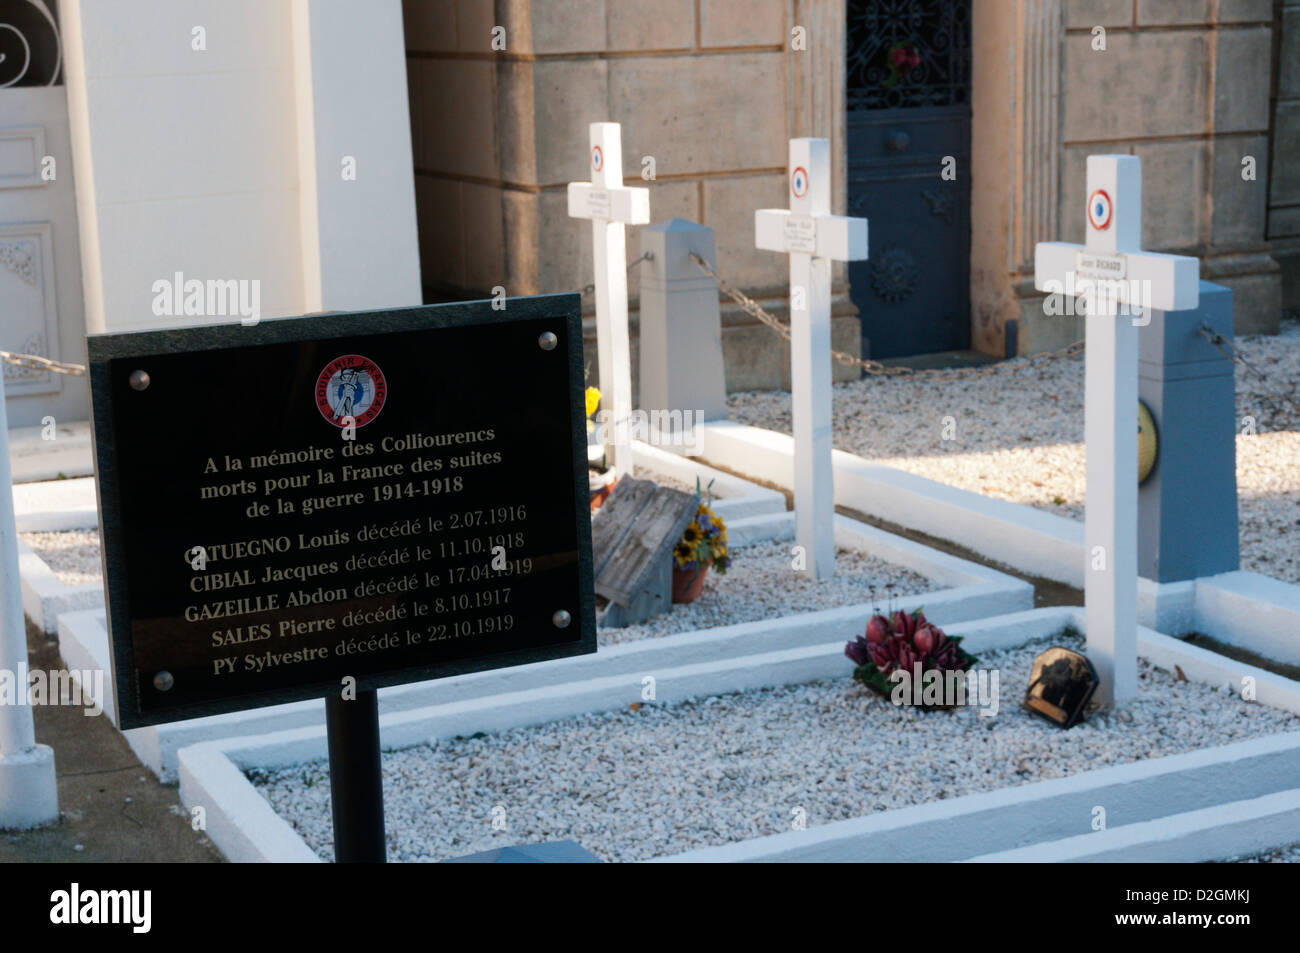 Sign in front of WWI graves in Collioure cemetery. DETAILS IN DESCRIPTION. Stock Photo